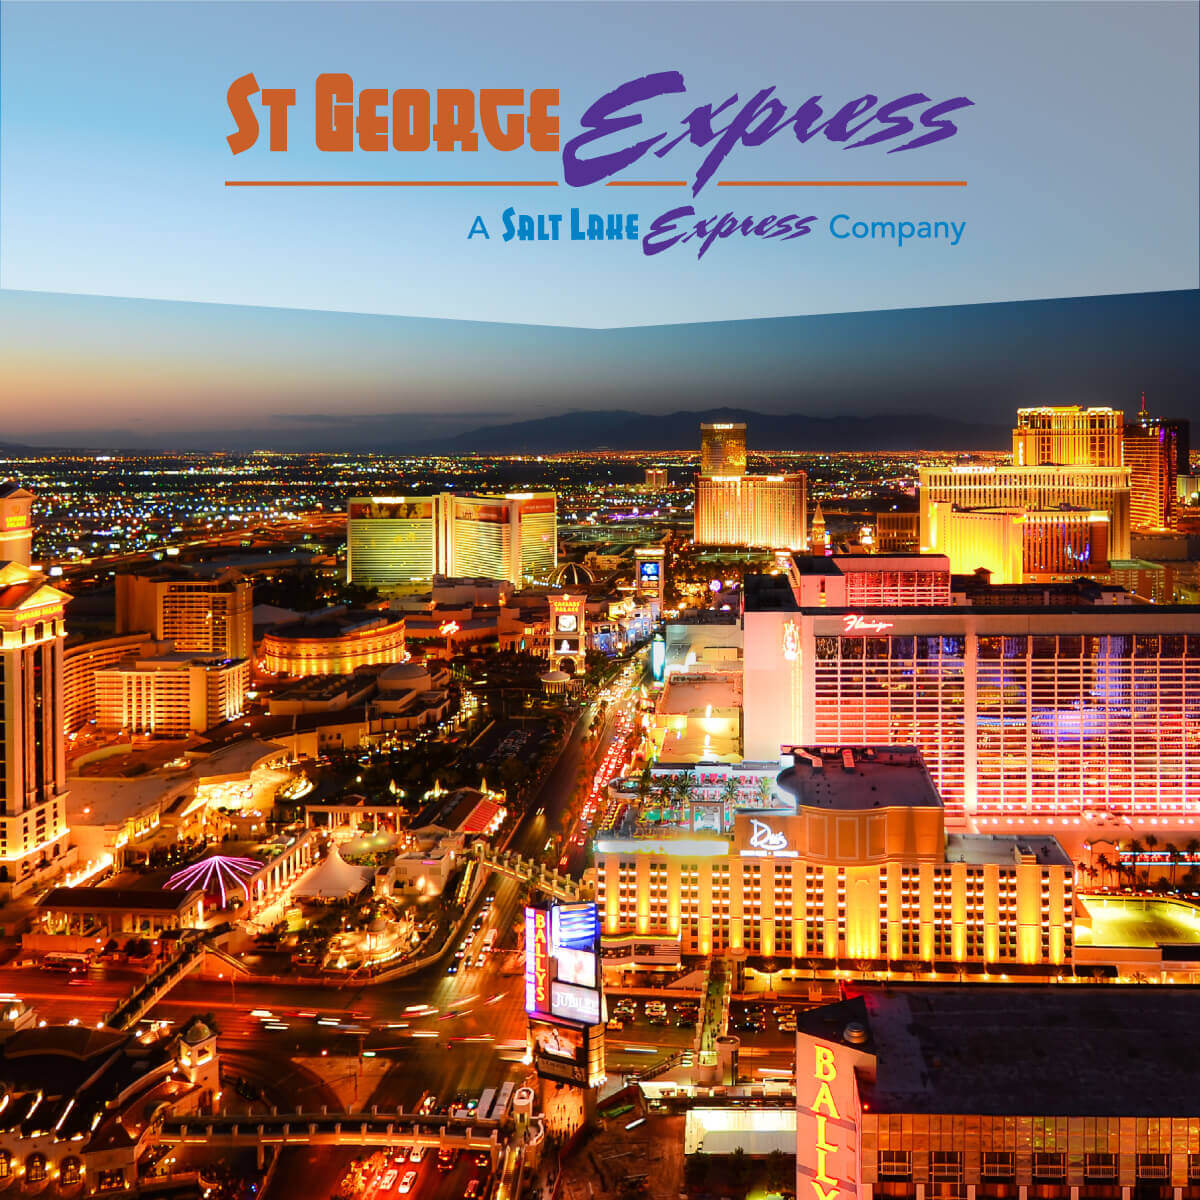 St. George Express 10 - St. George Express